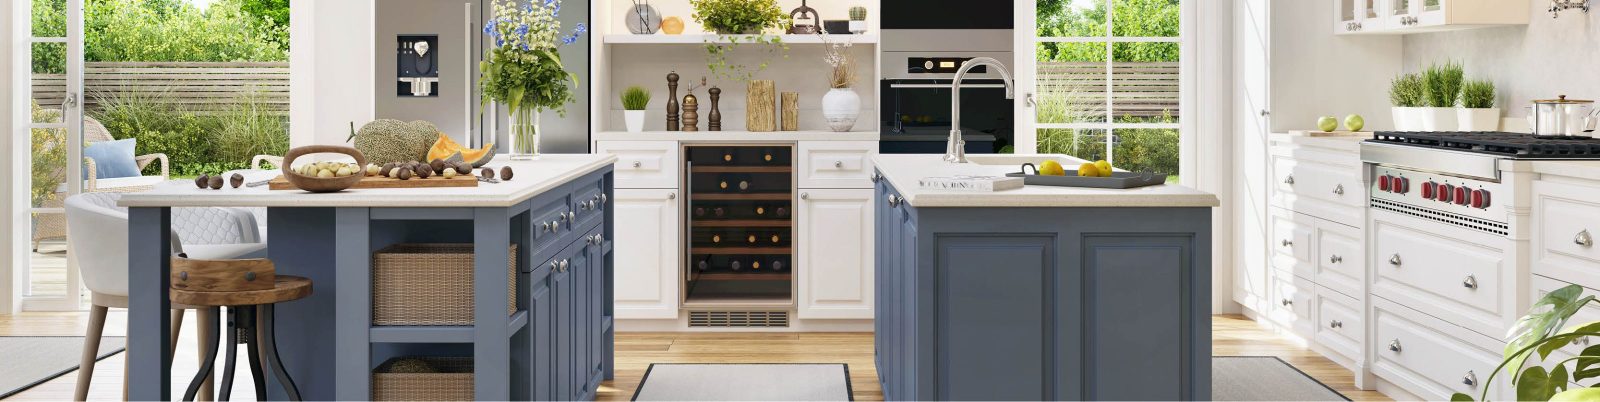 Kitchen Cabinets - Axalta Building Products